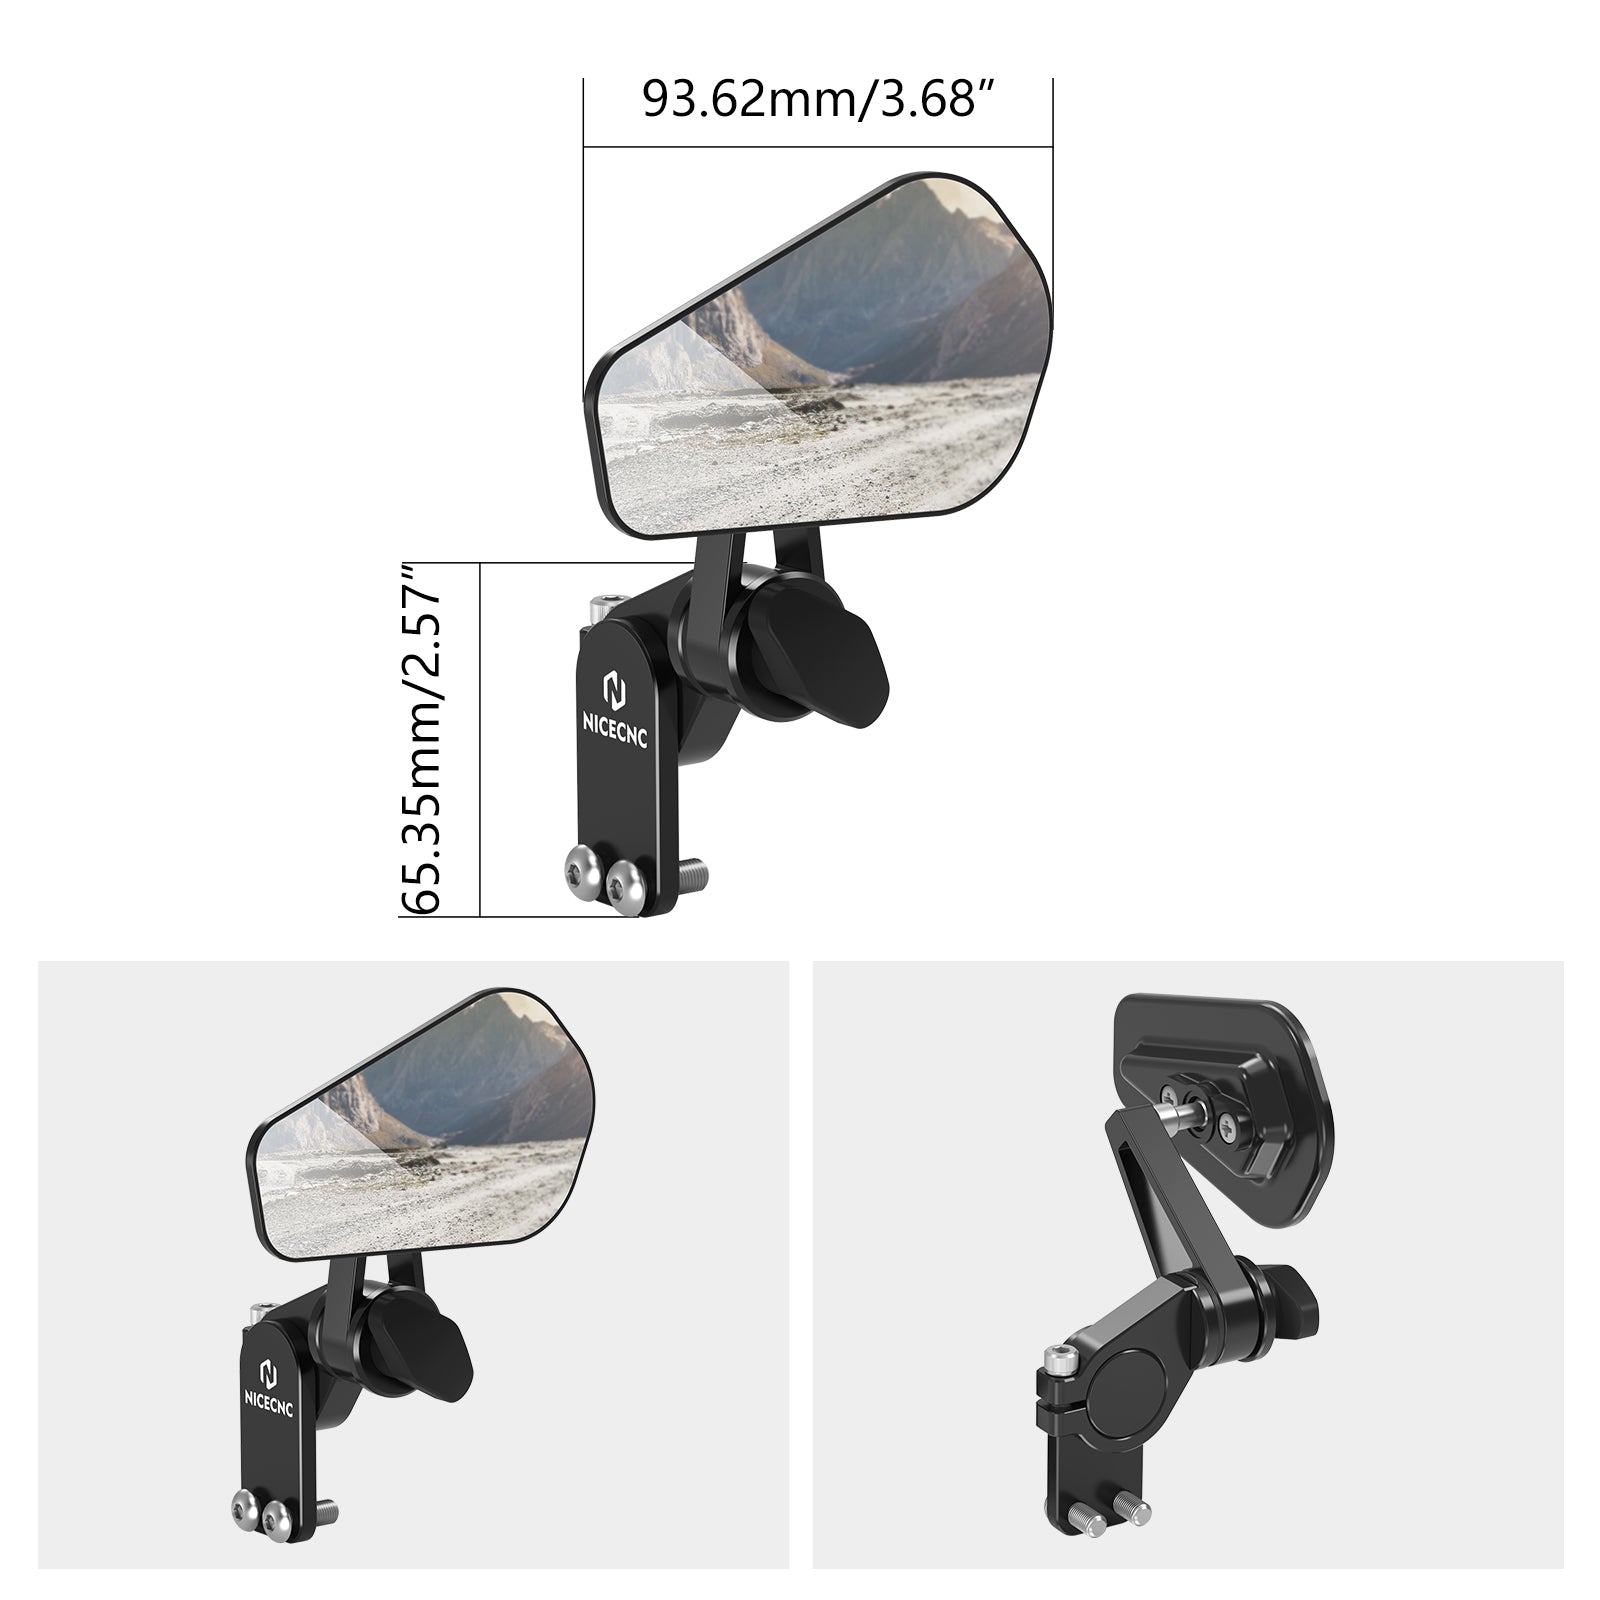 Upgraded Quick Flip Arrow Folding Mirrors Kits for Universal Motorcycle Hand Guard